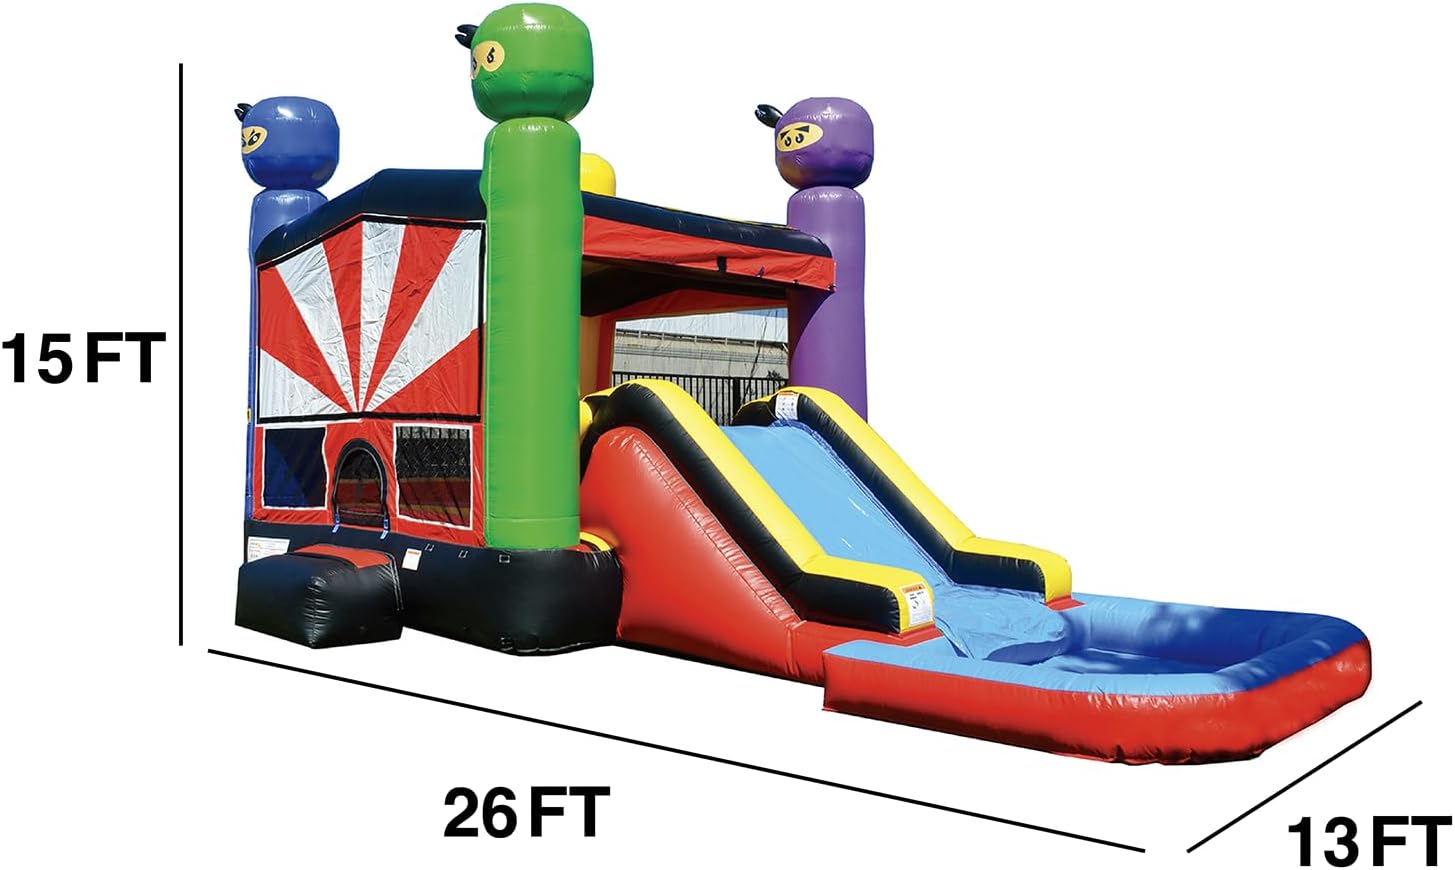 Inflatable ninja bounce house with slide, 26x13x15 ft, in primary colors.